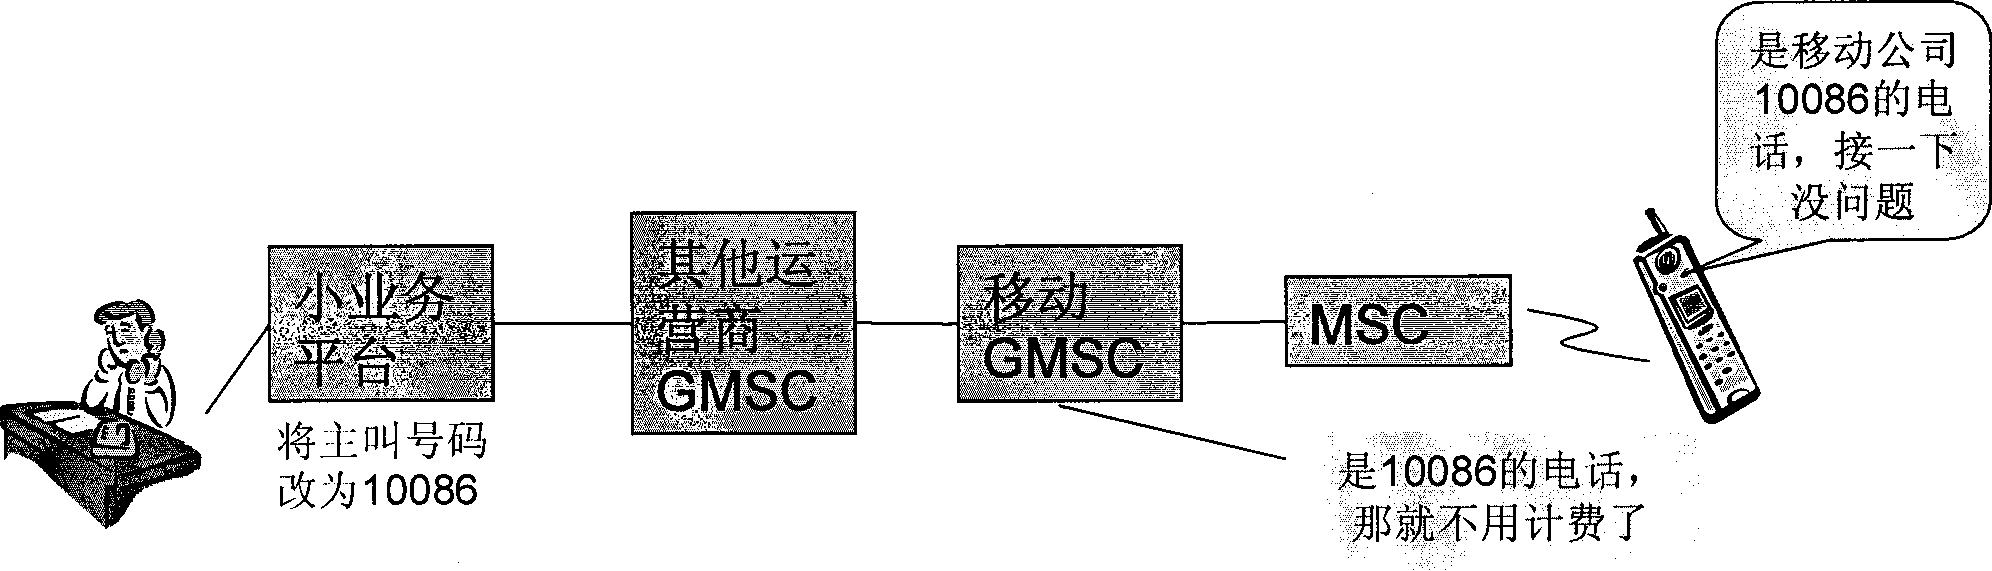 Method for monitoring false calling number between nets